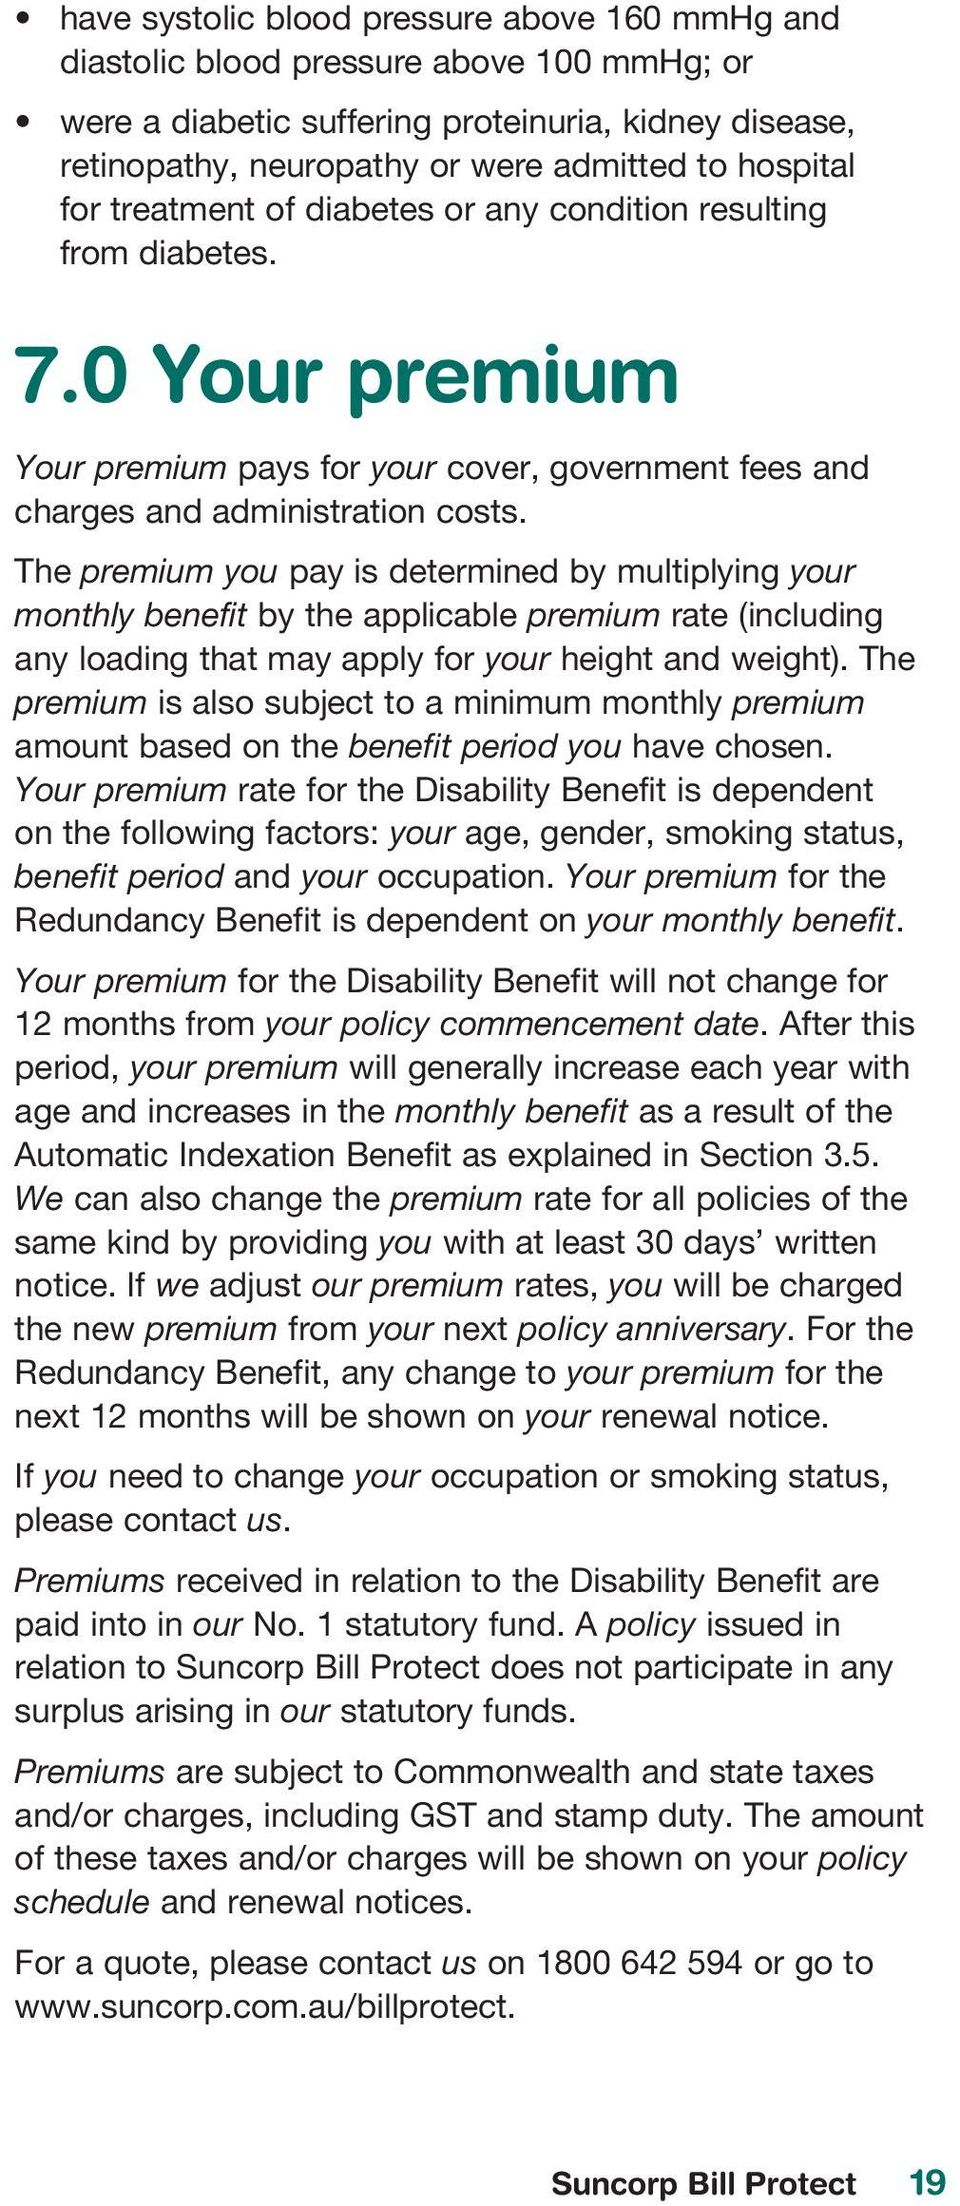 The premium you pay is determined by multiplying your monthly benefit by the applicable premium rate (including any loading that may apply for your height and weight).